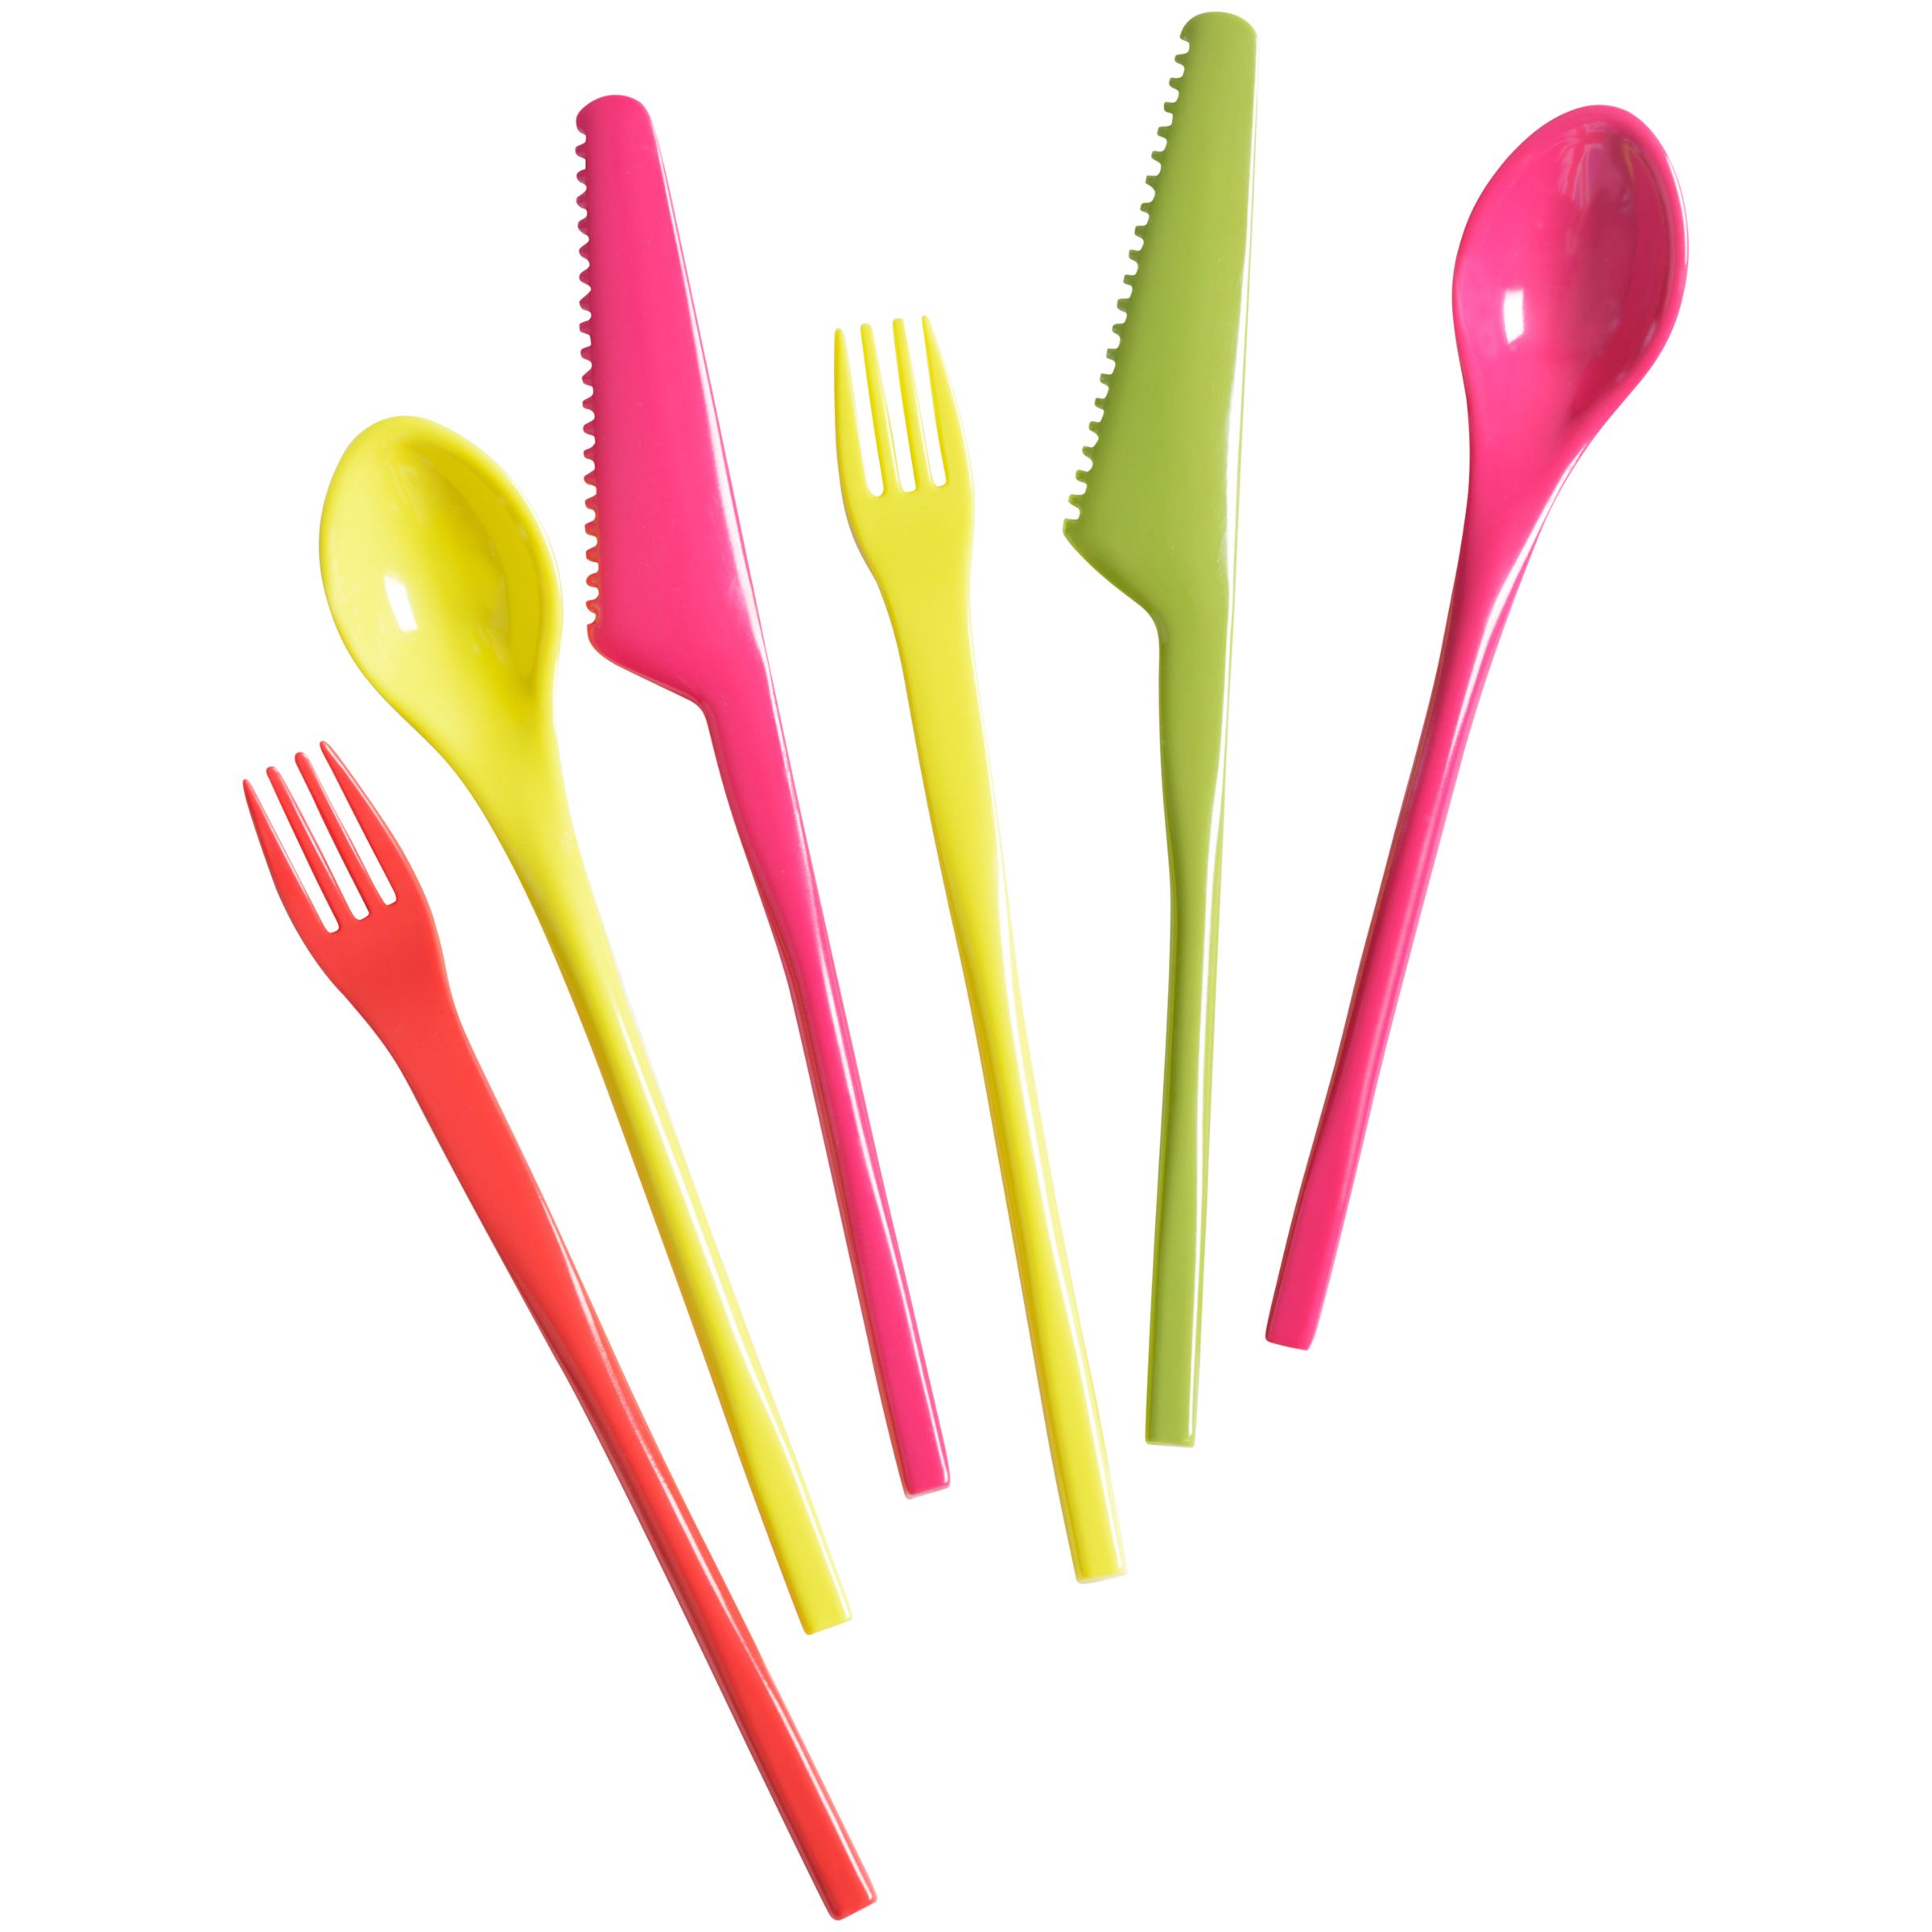 House by John Lewis Picnic Cutlery Set, 6 Piece, Multi